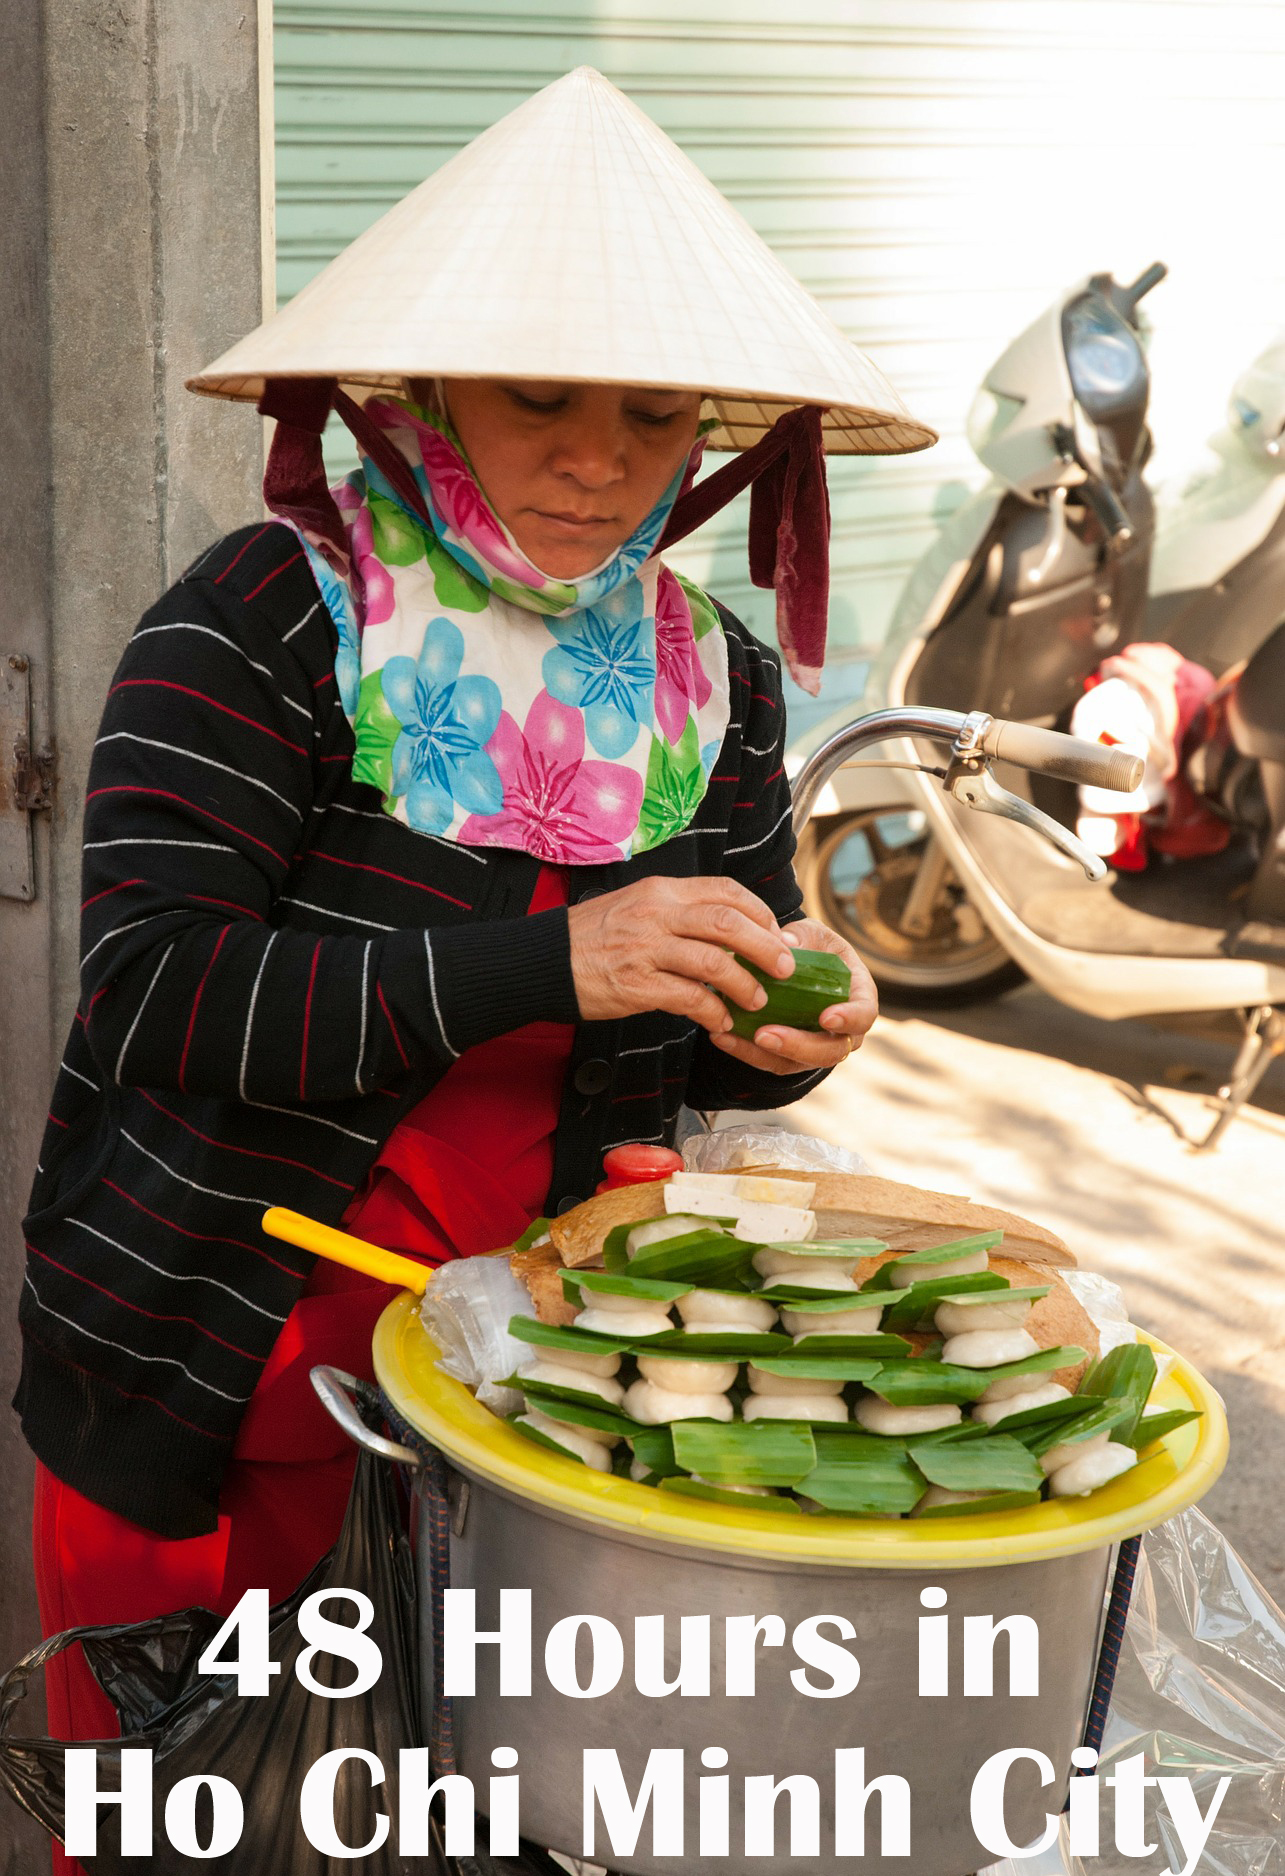 48 hours in Ho Chi Minh City